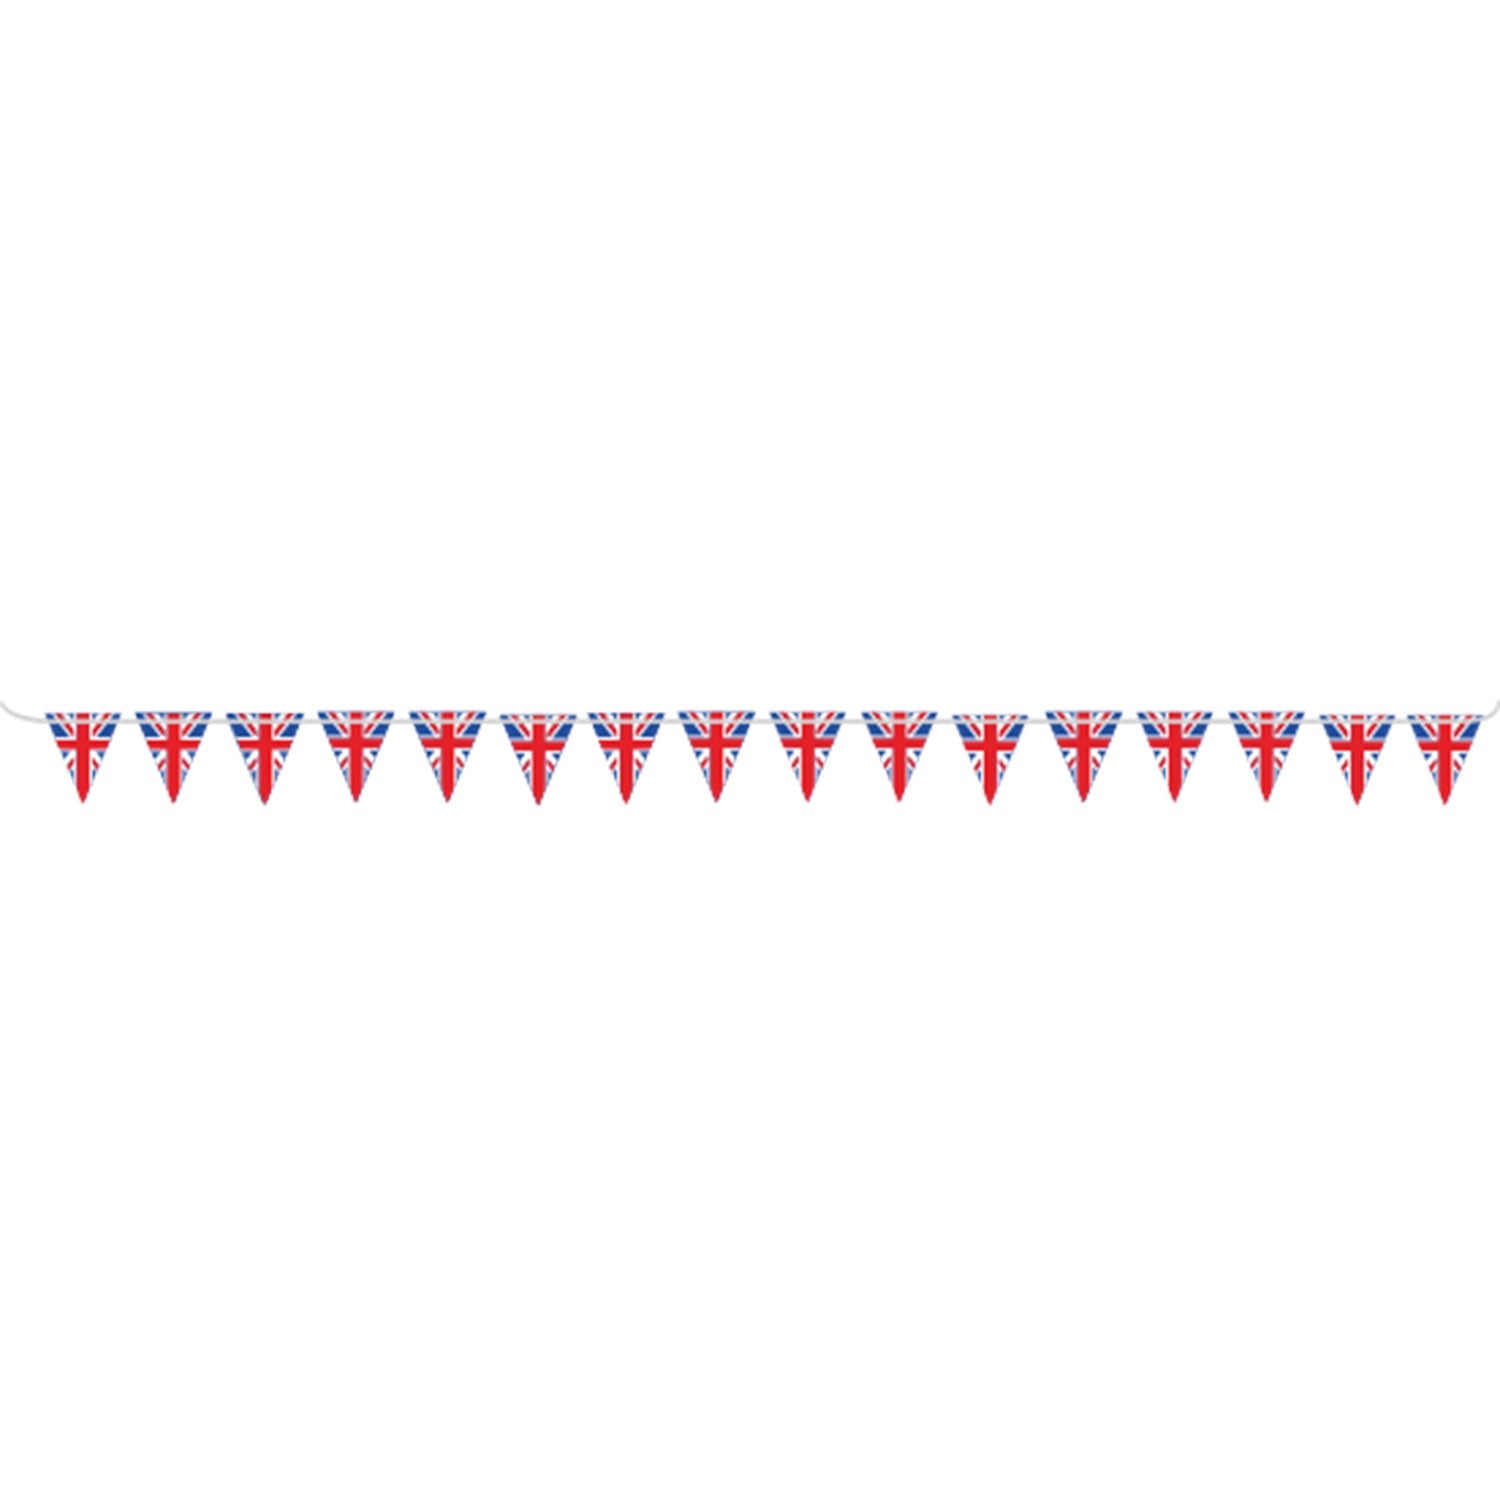 Union Jack Red White Blue Paper Pennant Bunting 10 mtr (1pc)